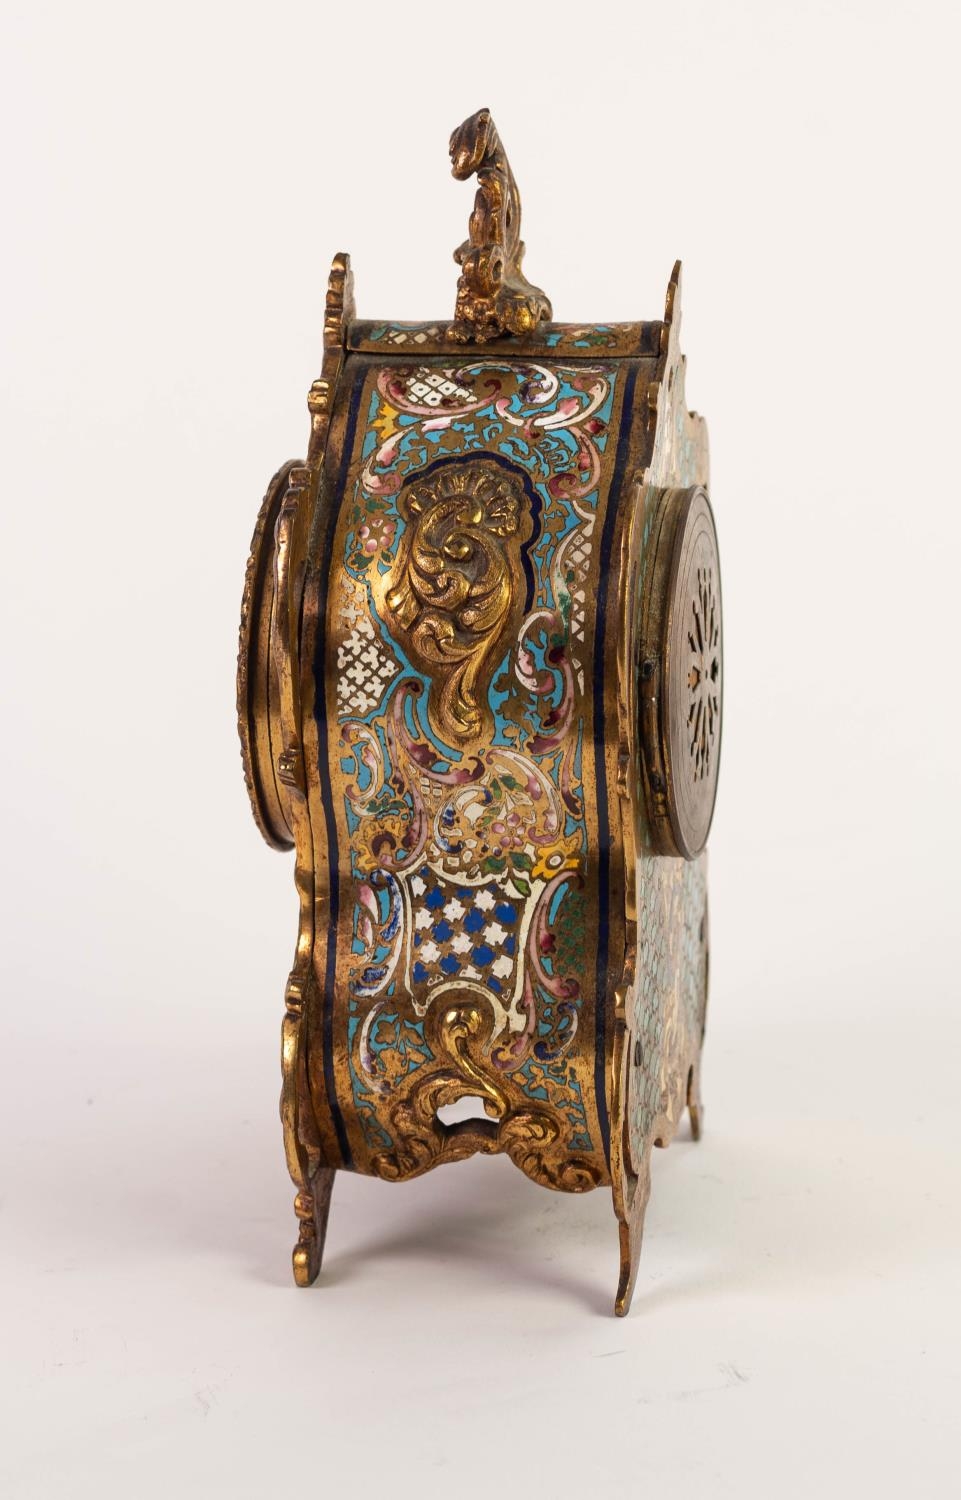 CIRCA 1900 FRENCH GILT METAL AND CHAMPLEVE ENAMEL ROCOCO REVIVAL CASED MANTEL CLOCK, the movement by - Image 5 of 8